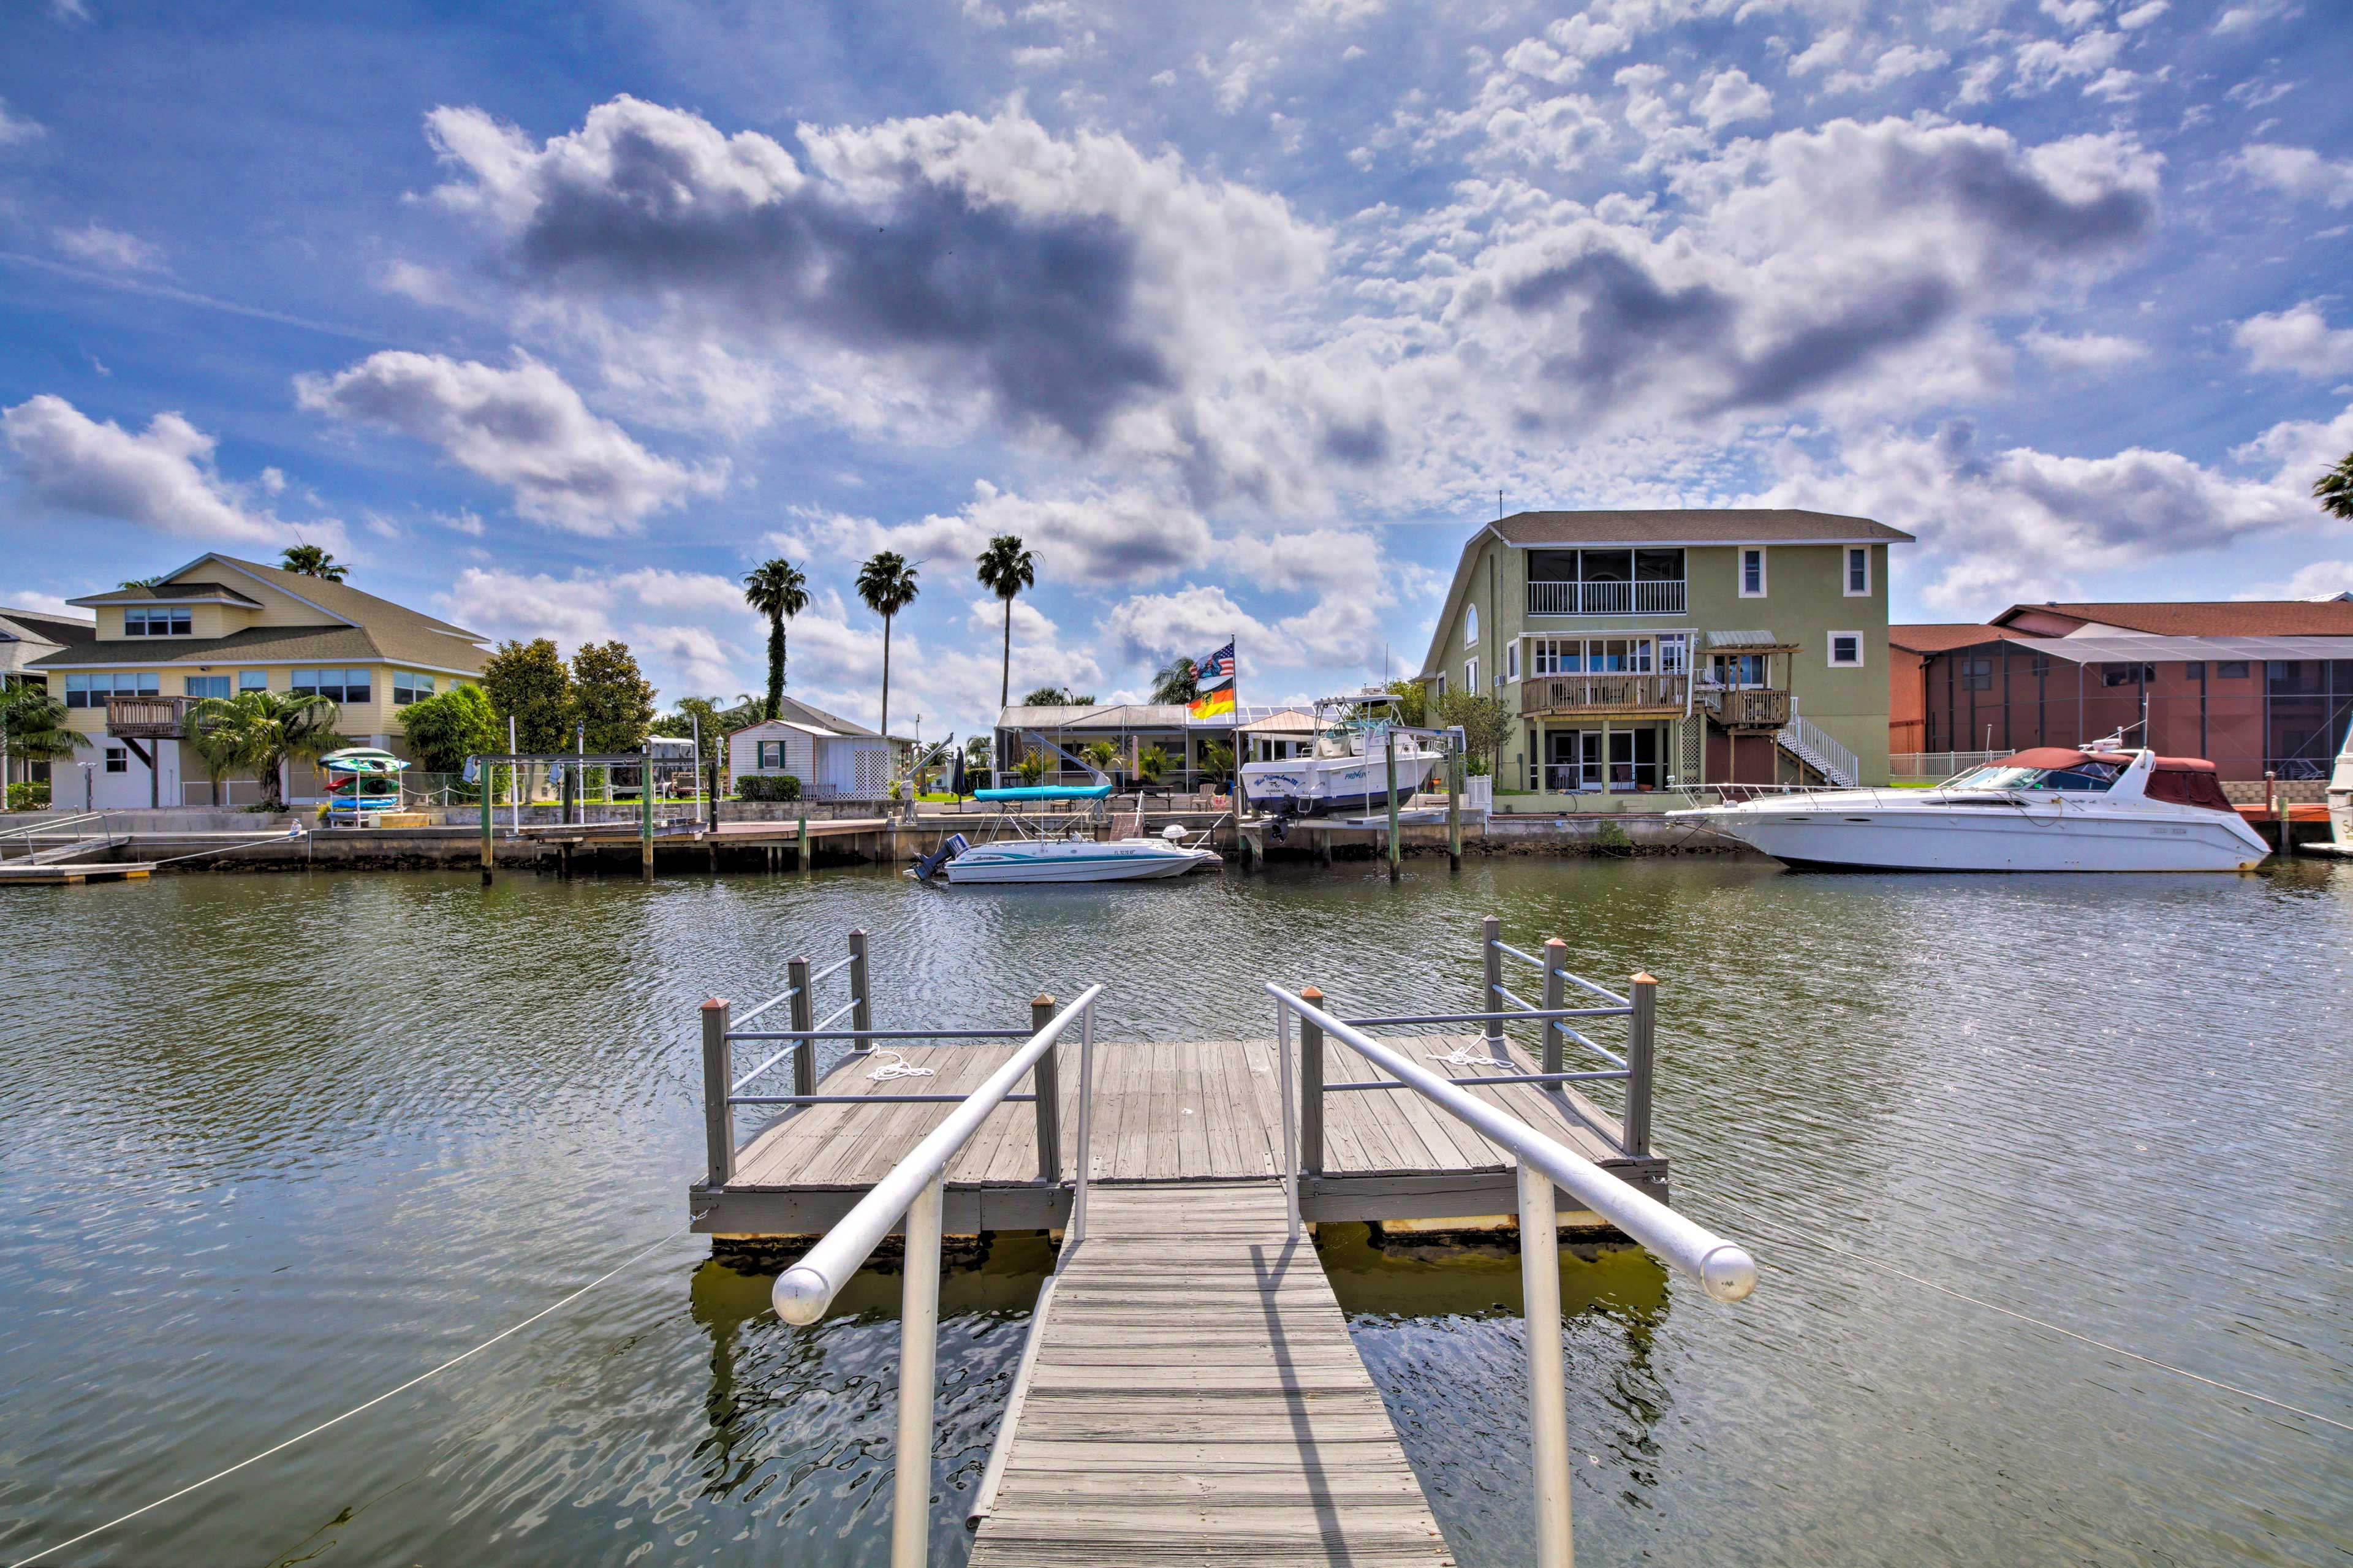 The property is located right on a canal with a dock for easy access.